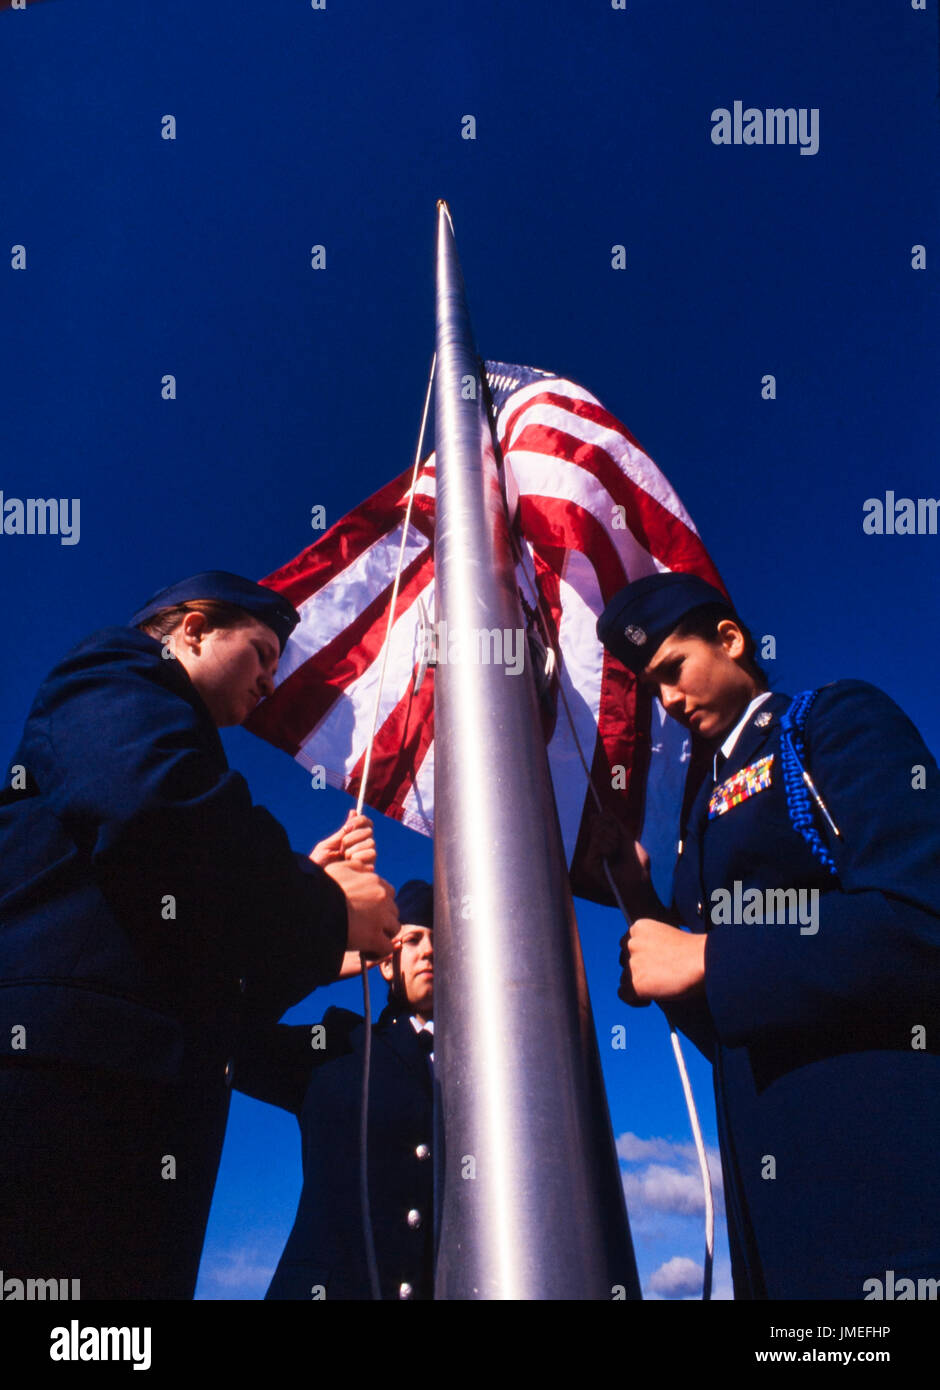 US flag raising ceremony performed by US Air Force ROTC - reserve officer training corps - high school cadets in uniform outside their high school Stock Photo